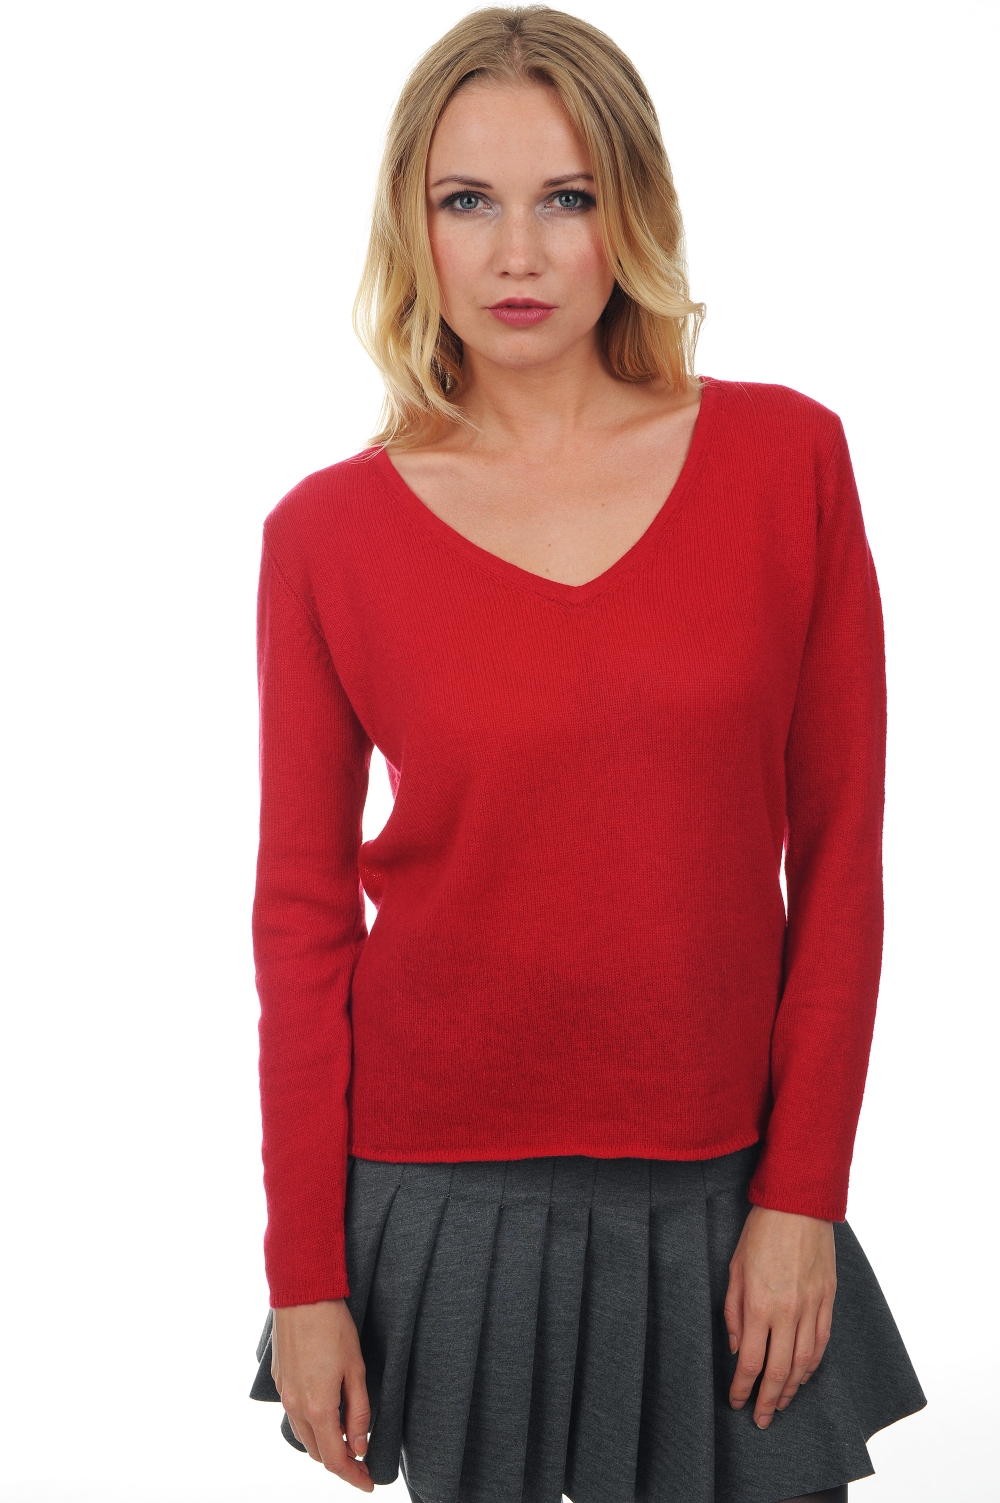 Cashmere ladies timeless classics flavie blood red s